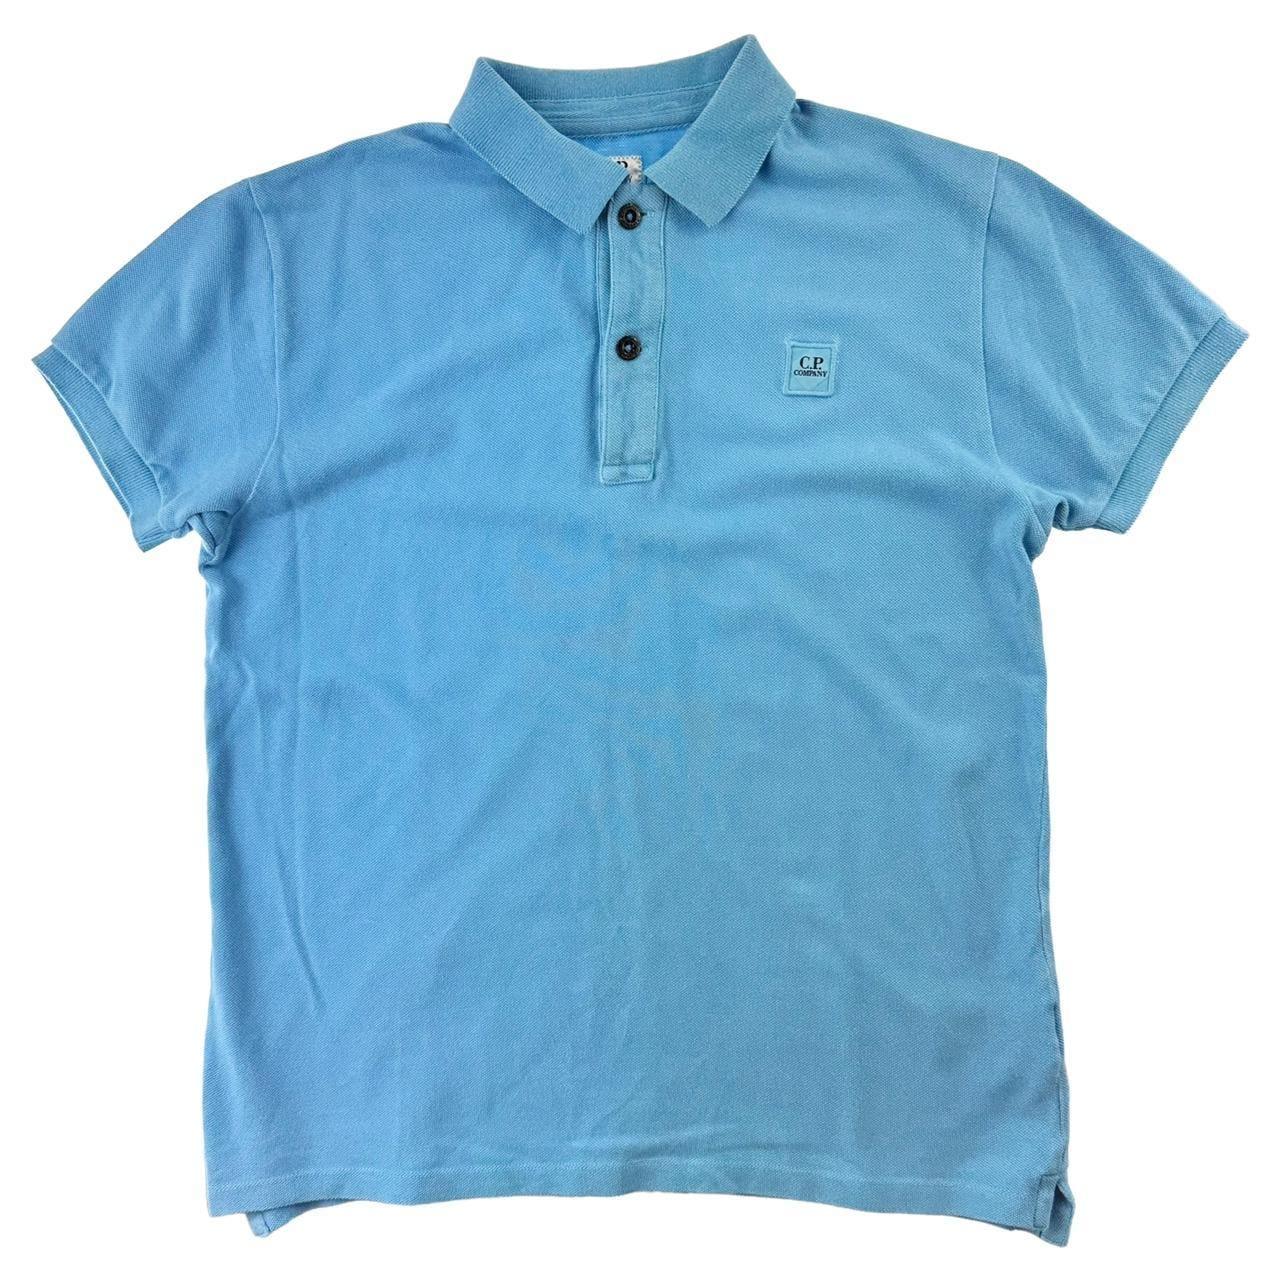 CP Company polo shirt size XS - Known Source